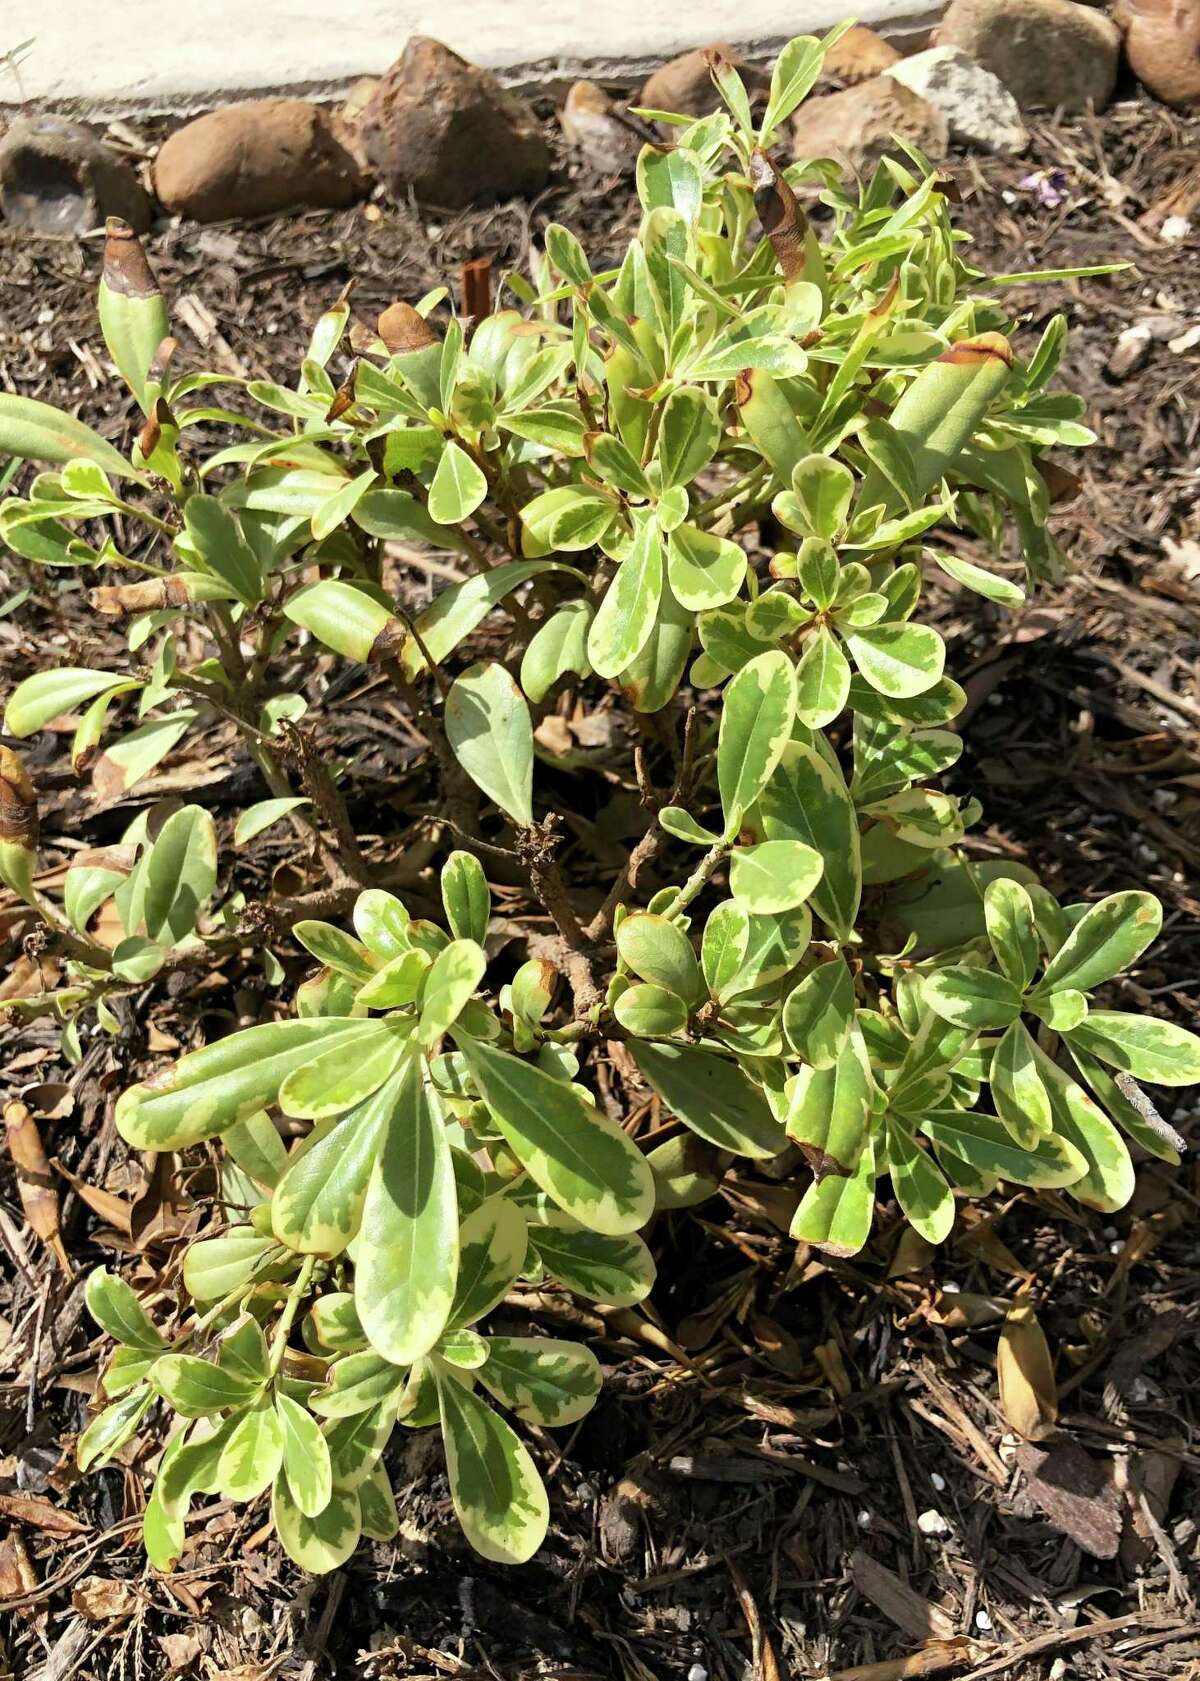 The brown edges on the leaves of this newly planted pittosporum indicate it may have gotten too dry soon after planting, it might have gotten too much fertilizer soon after planting, or it may be suffering from wind burn from the spring breezes.